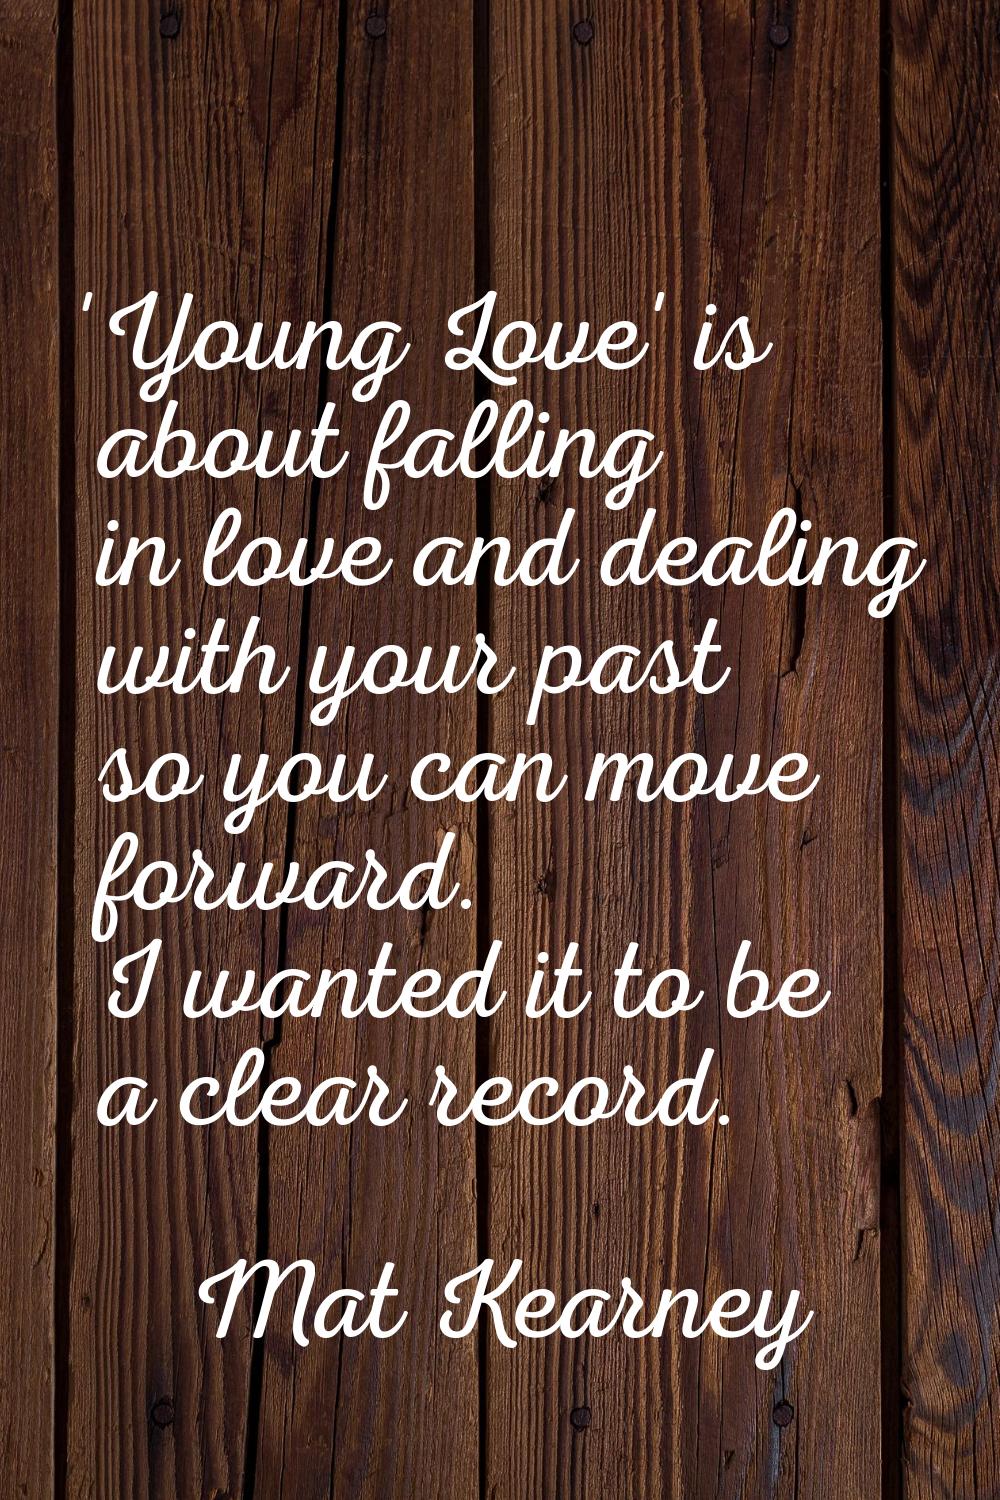 'Young Love' is about falling in love and dealing with your past so you can move forward. I wanted 